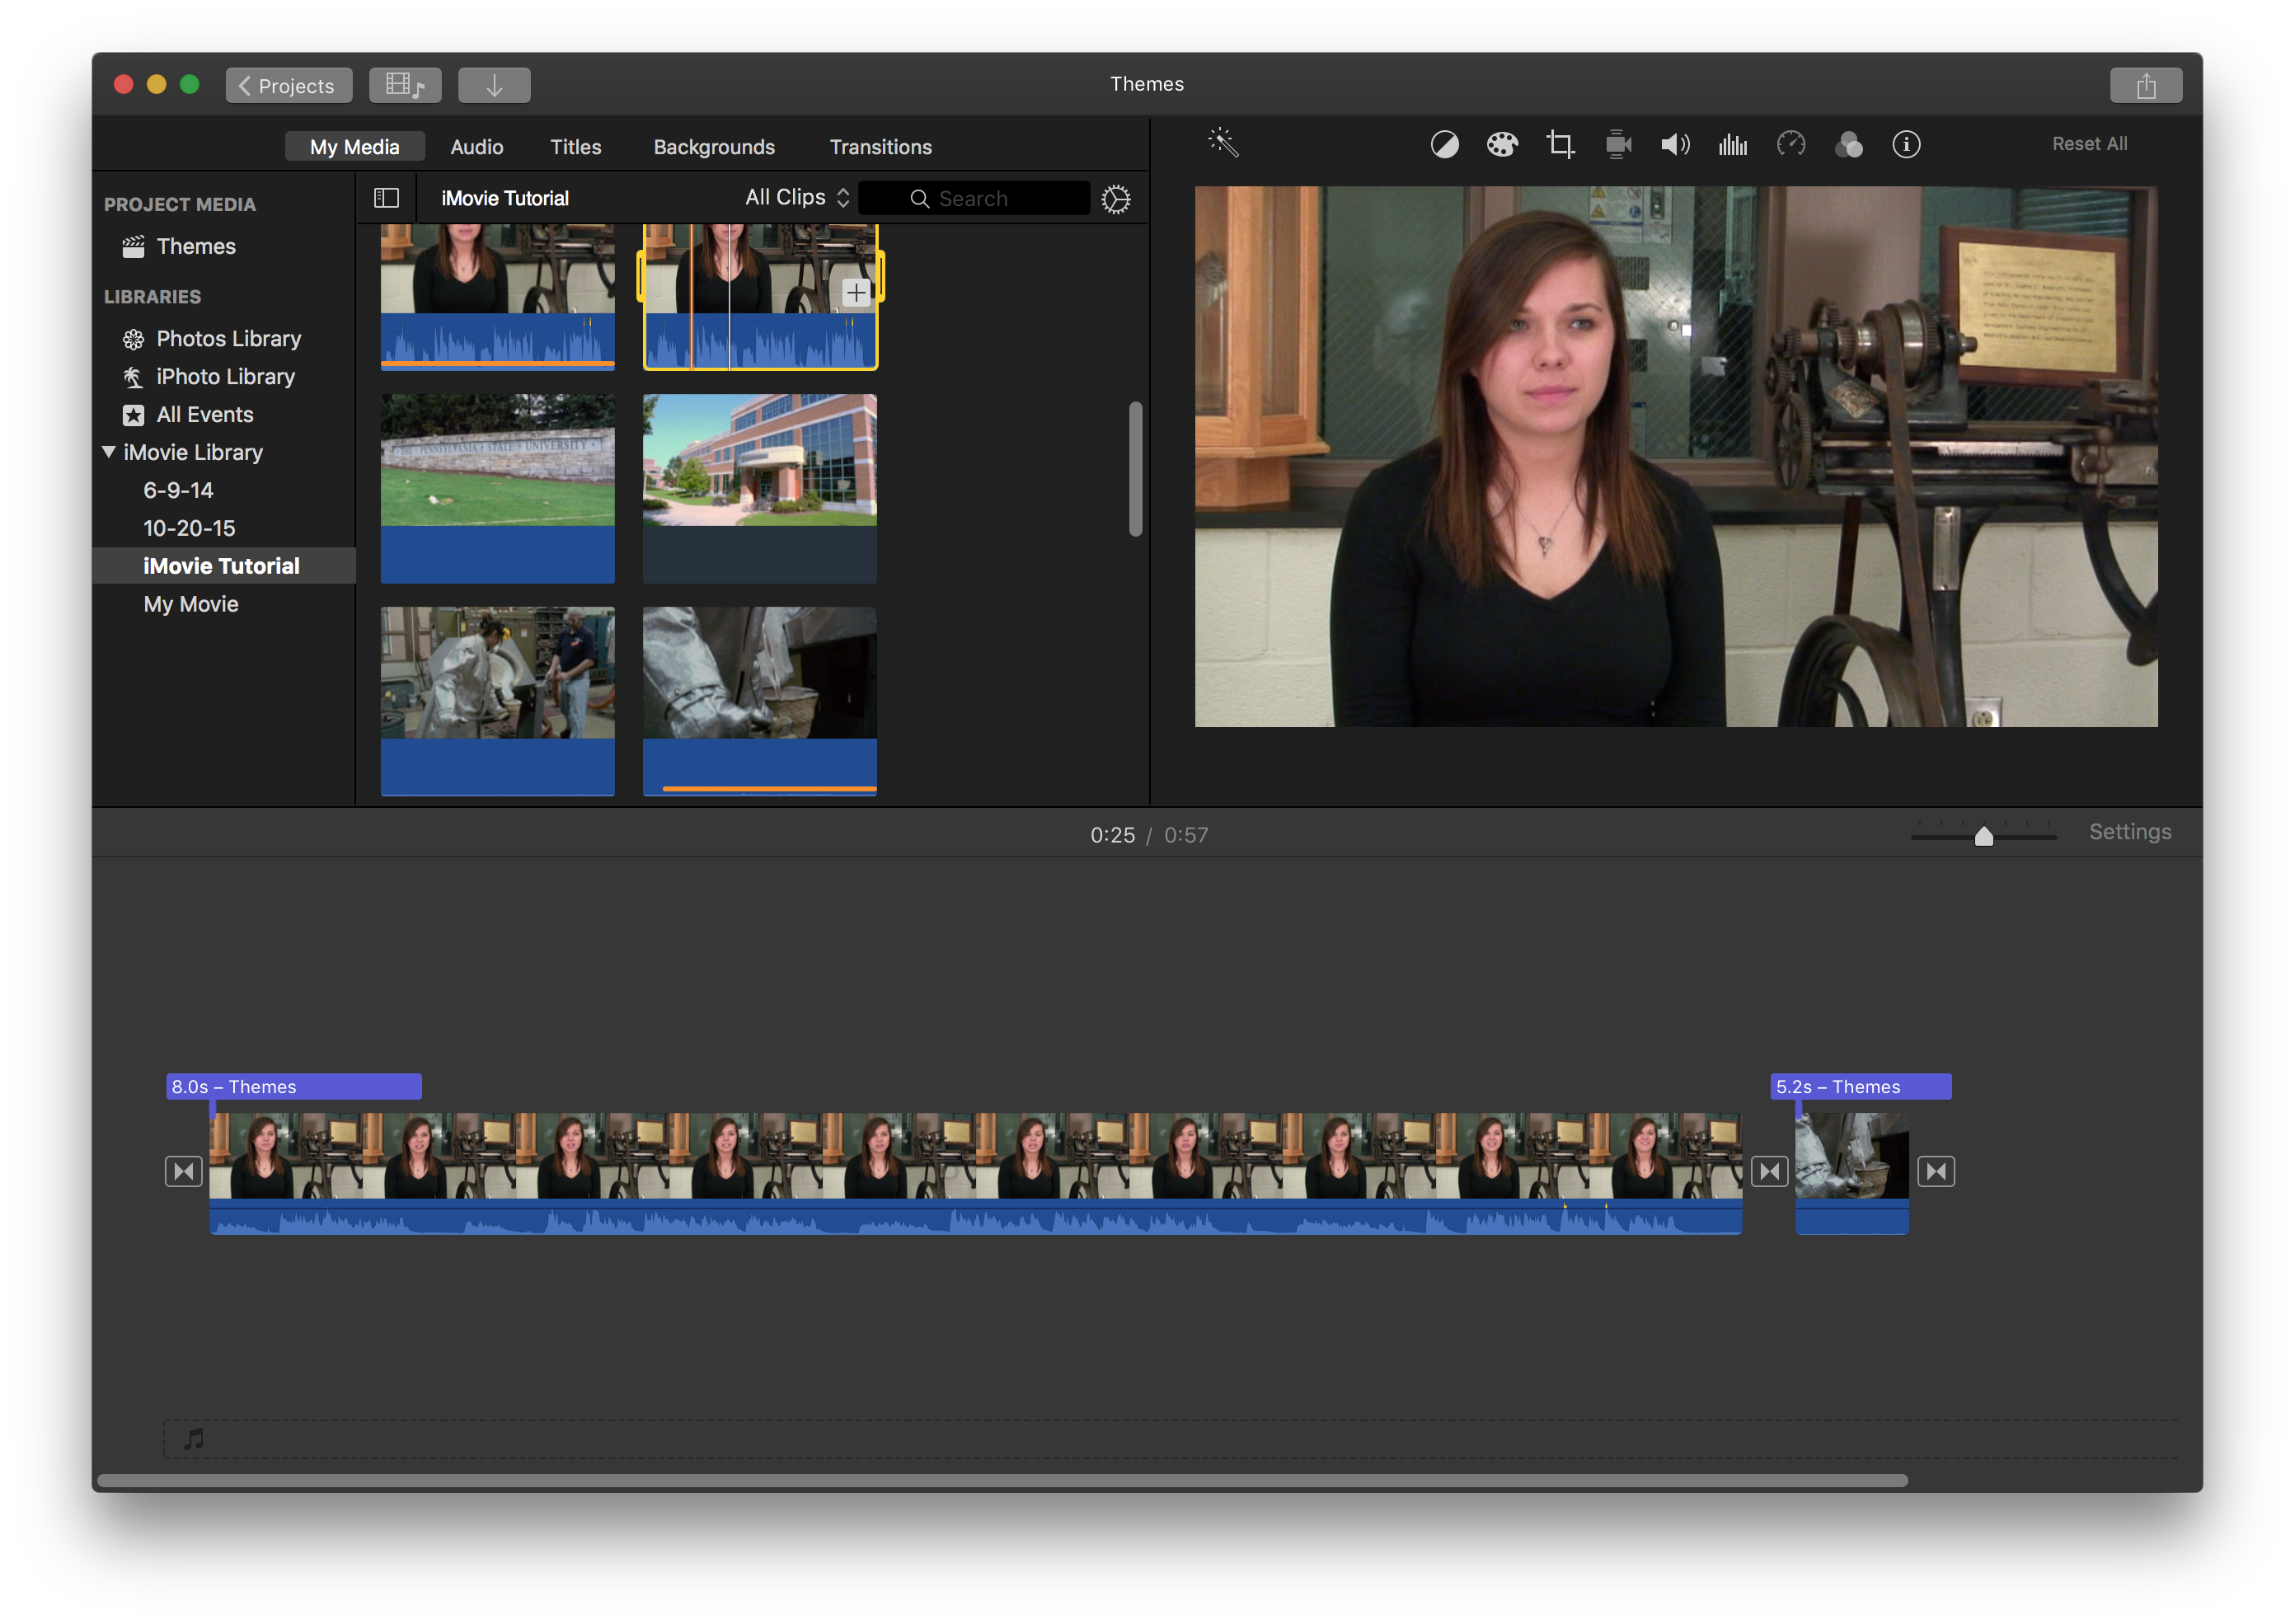 The project interface in iMovie.